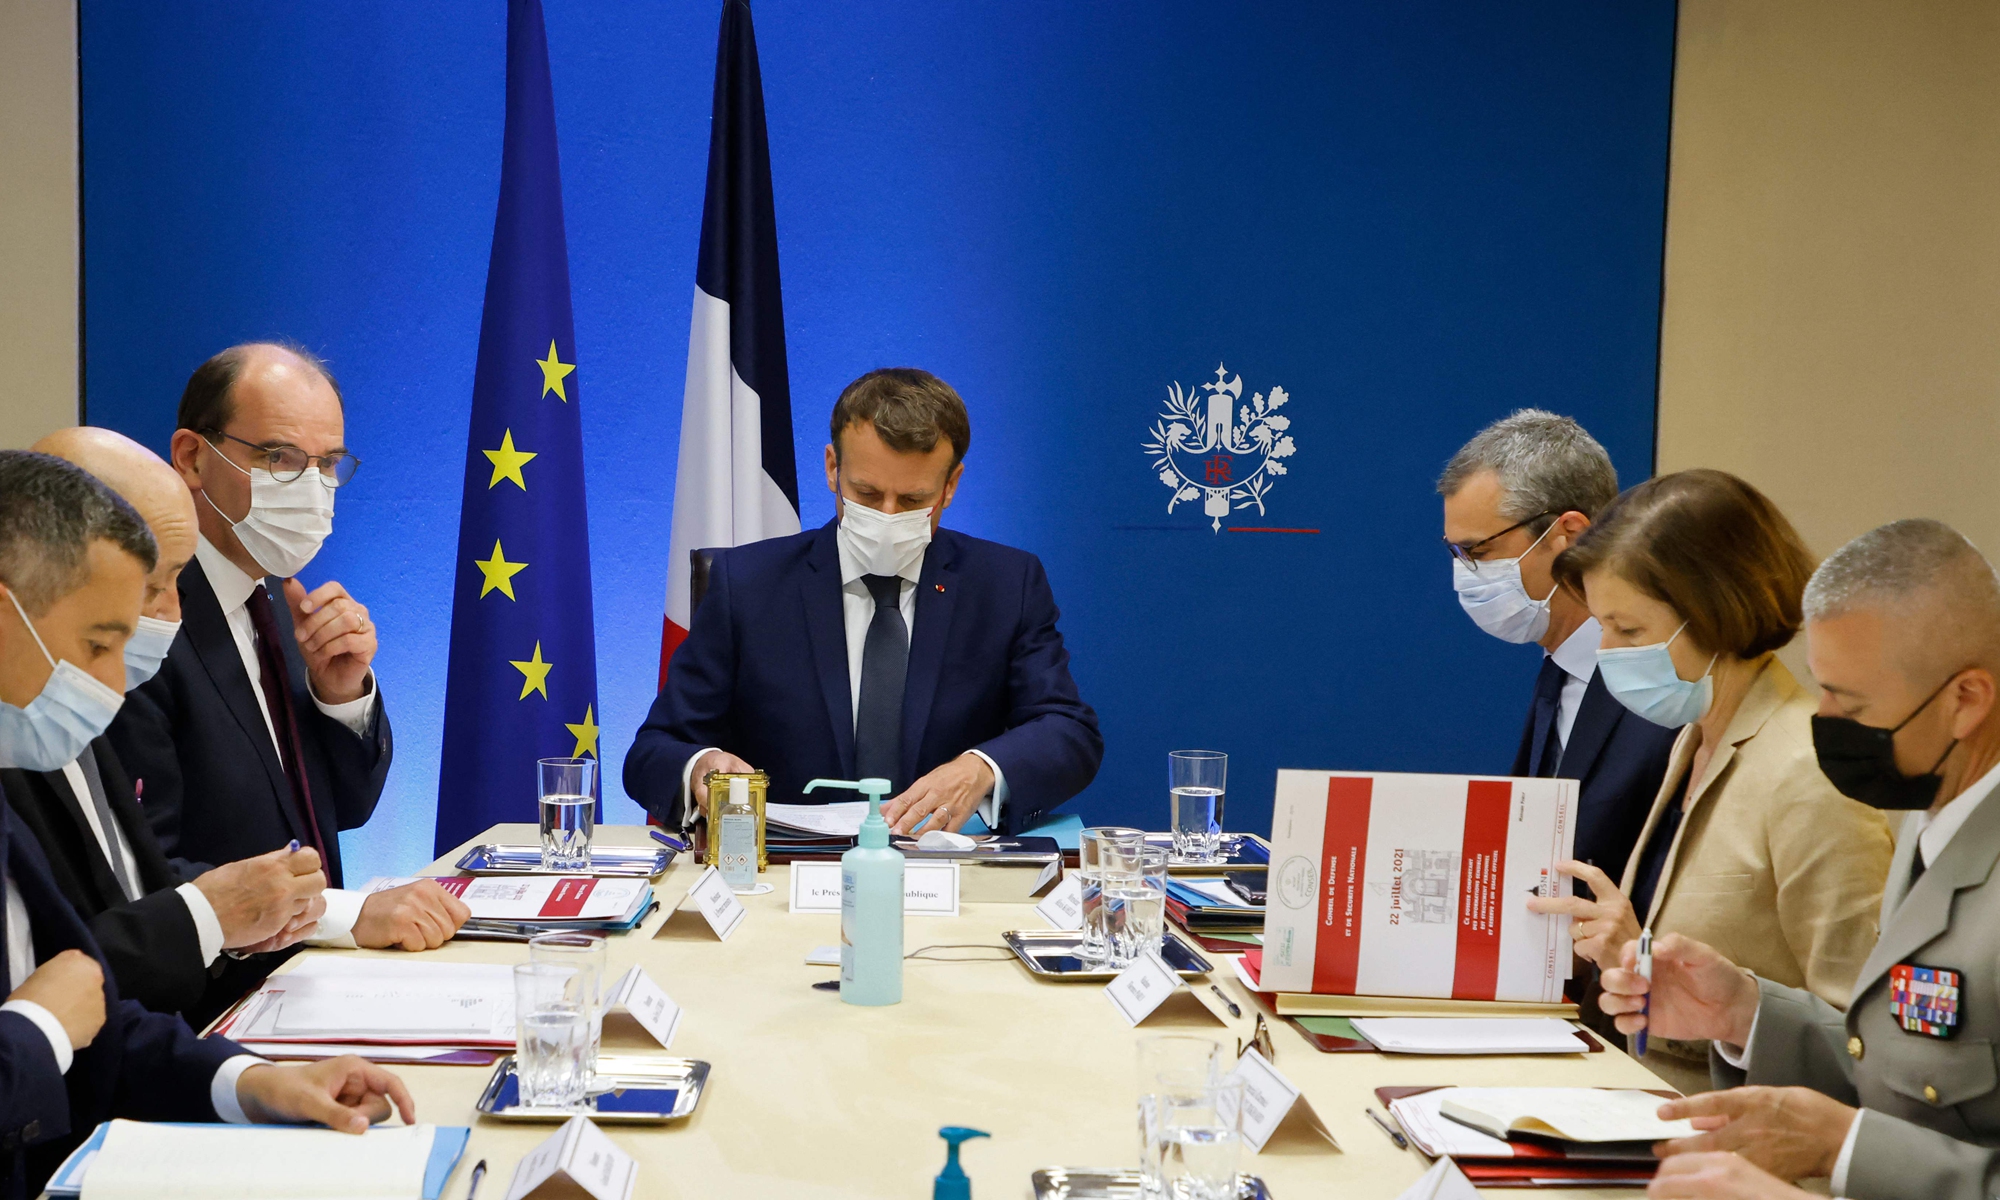 French President Emmanuel Macron (center) flanked by French Prime Minister Jean Castex (3rd from left), French European and Foreign Affairs Minister Jean-Yves Le Drian (2nd from left), French Interior Minister Gerald Darmanin (left), French Defense Minister Florence Parly (2nd from right) and newly appointed Chief of Staff of the Armed Forces Thierry Burkhard starts a national security meeting to discuss the Pegasus spyware, in the Jupiter room at the Elysee Presidential Palace in Paris on Thursday. Photo: VCG